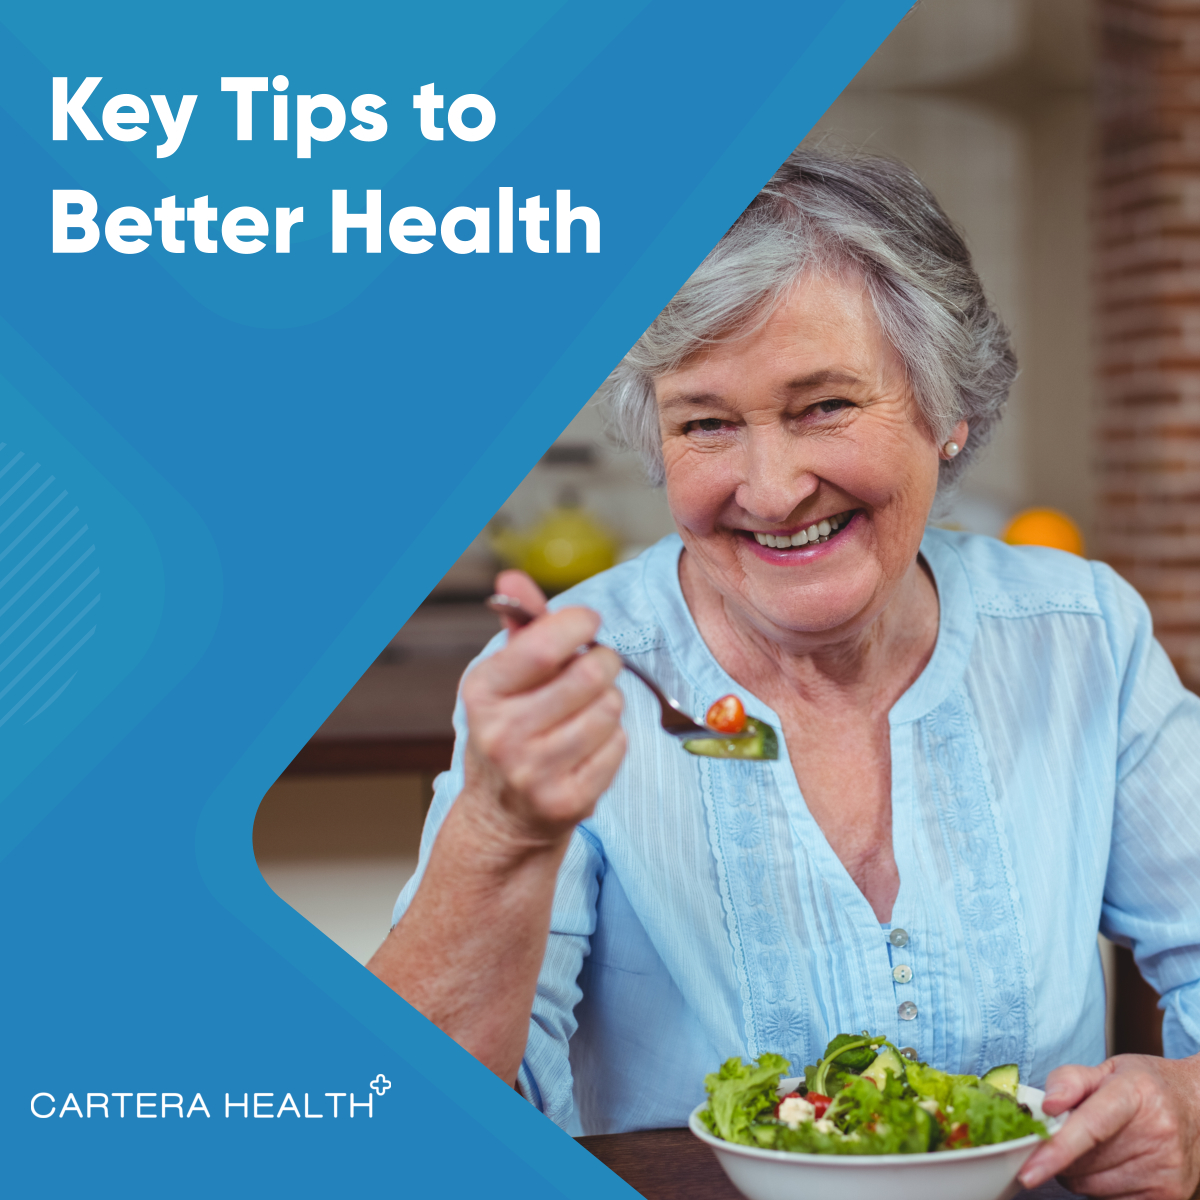 Nutrition is essential for overall health and well-being. Here are some tips on how to maintain good nutrition:

- Eat a balanced diet, which includes a variety of fruits, vegetables...

Read more: facebook.com/CarteraHealth/…

#KeyTips #BetterHealth #HomeHealthCareServices